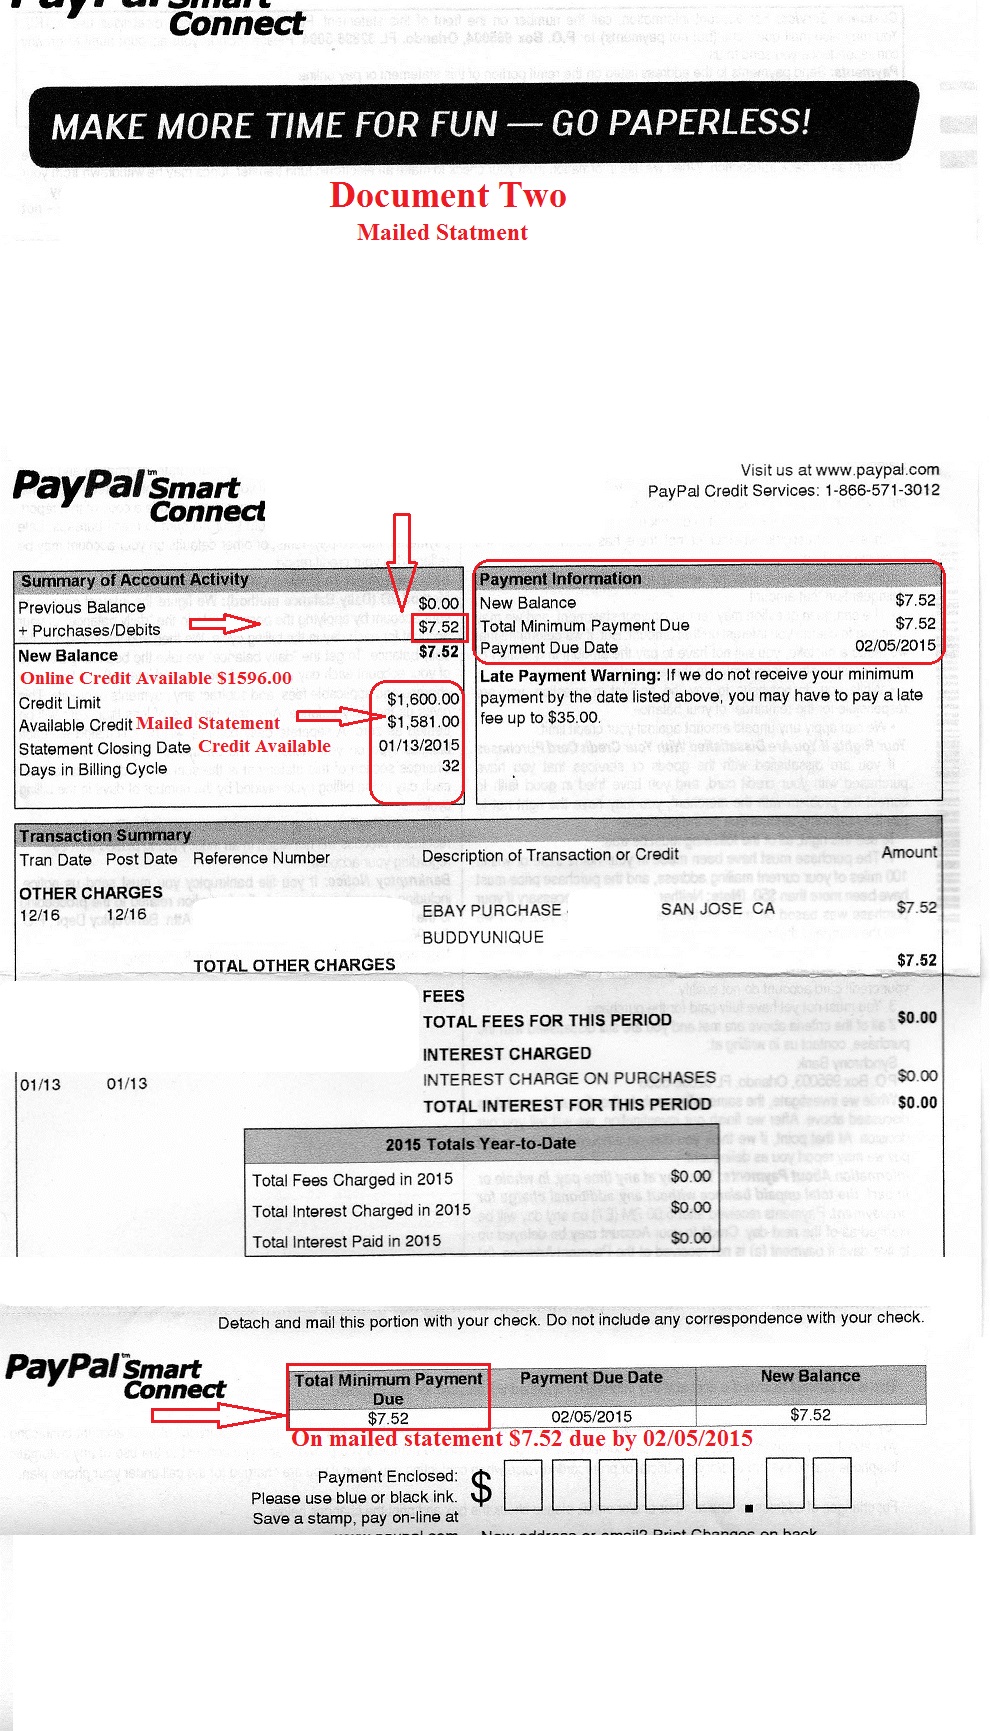 Another document with a different amount of money along with payment due